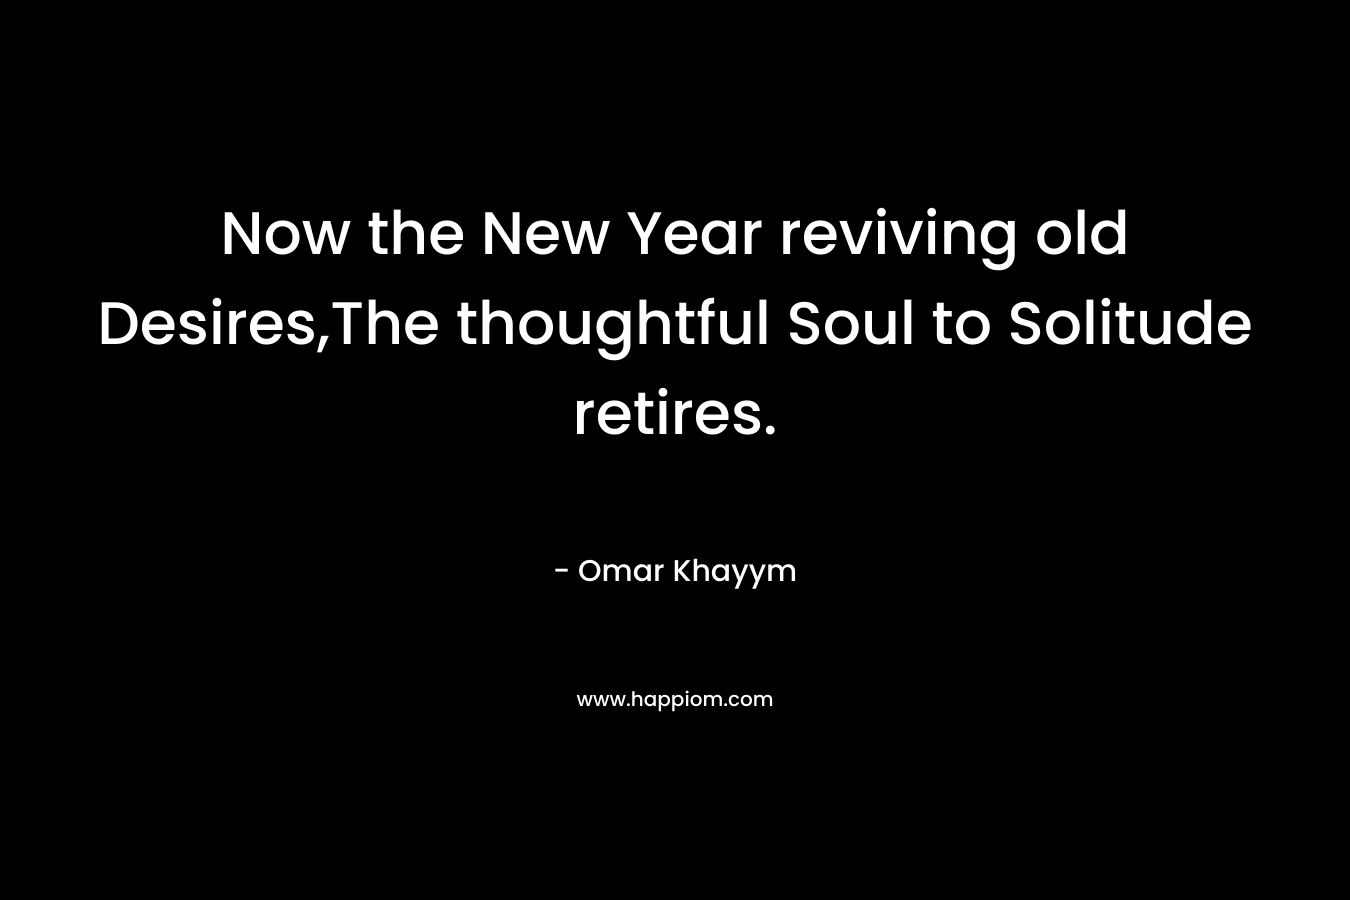 Now the New Year reviving old Desires,The thoughtful Soul to Solitude retires. – Omar Khayym